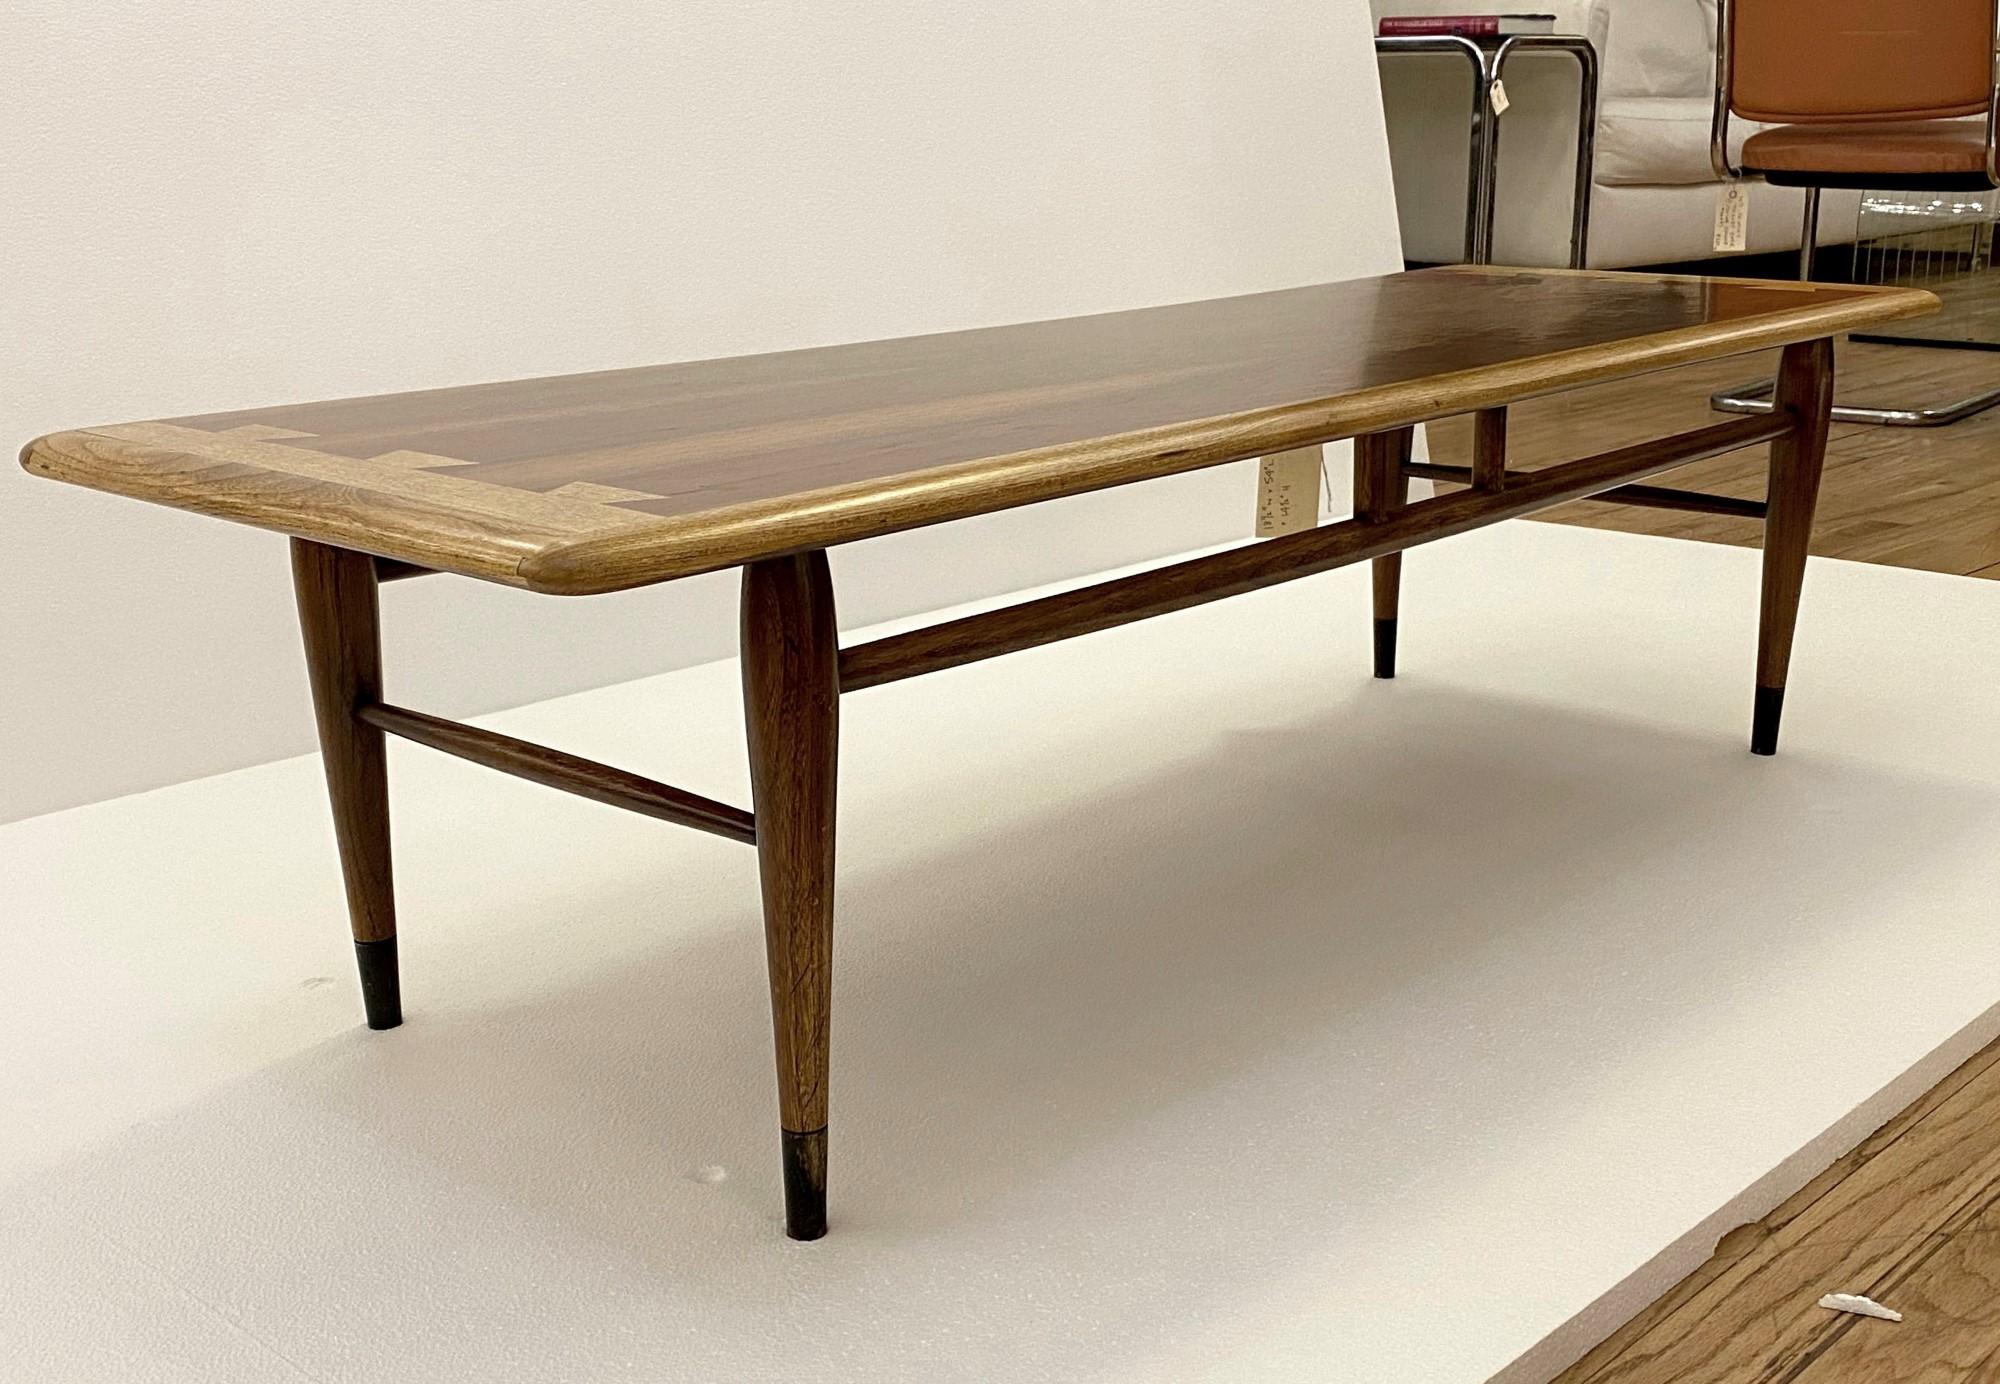 1960s Lane coffee table from their Acclaim series. Features both walnut and hickory woods with dovetail details. Serial number 4 662201. Style number 900-01.